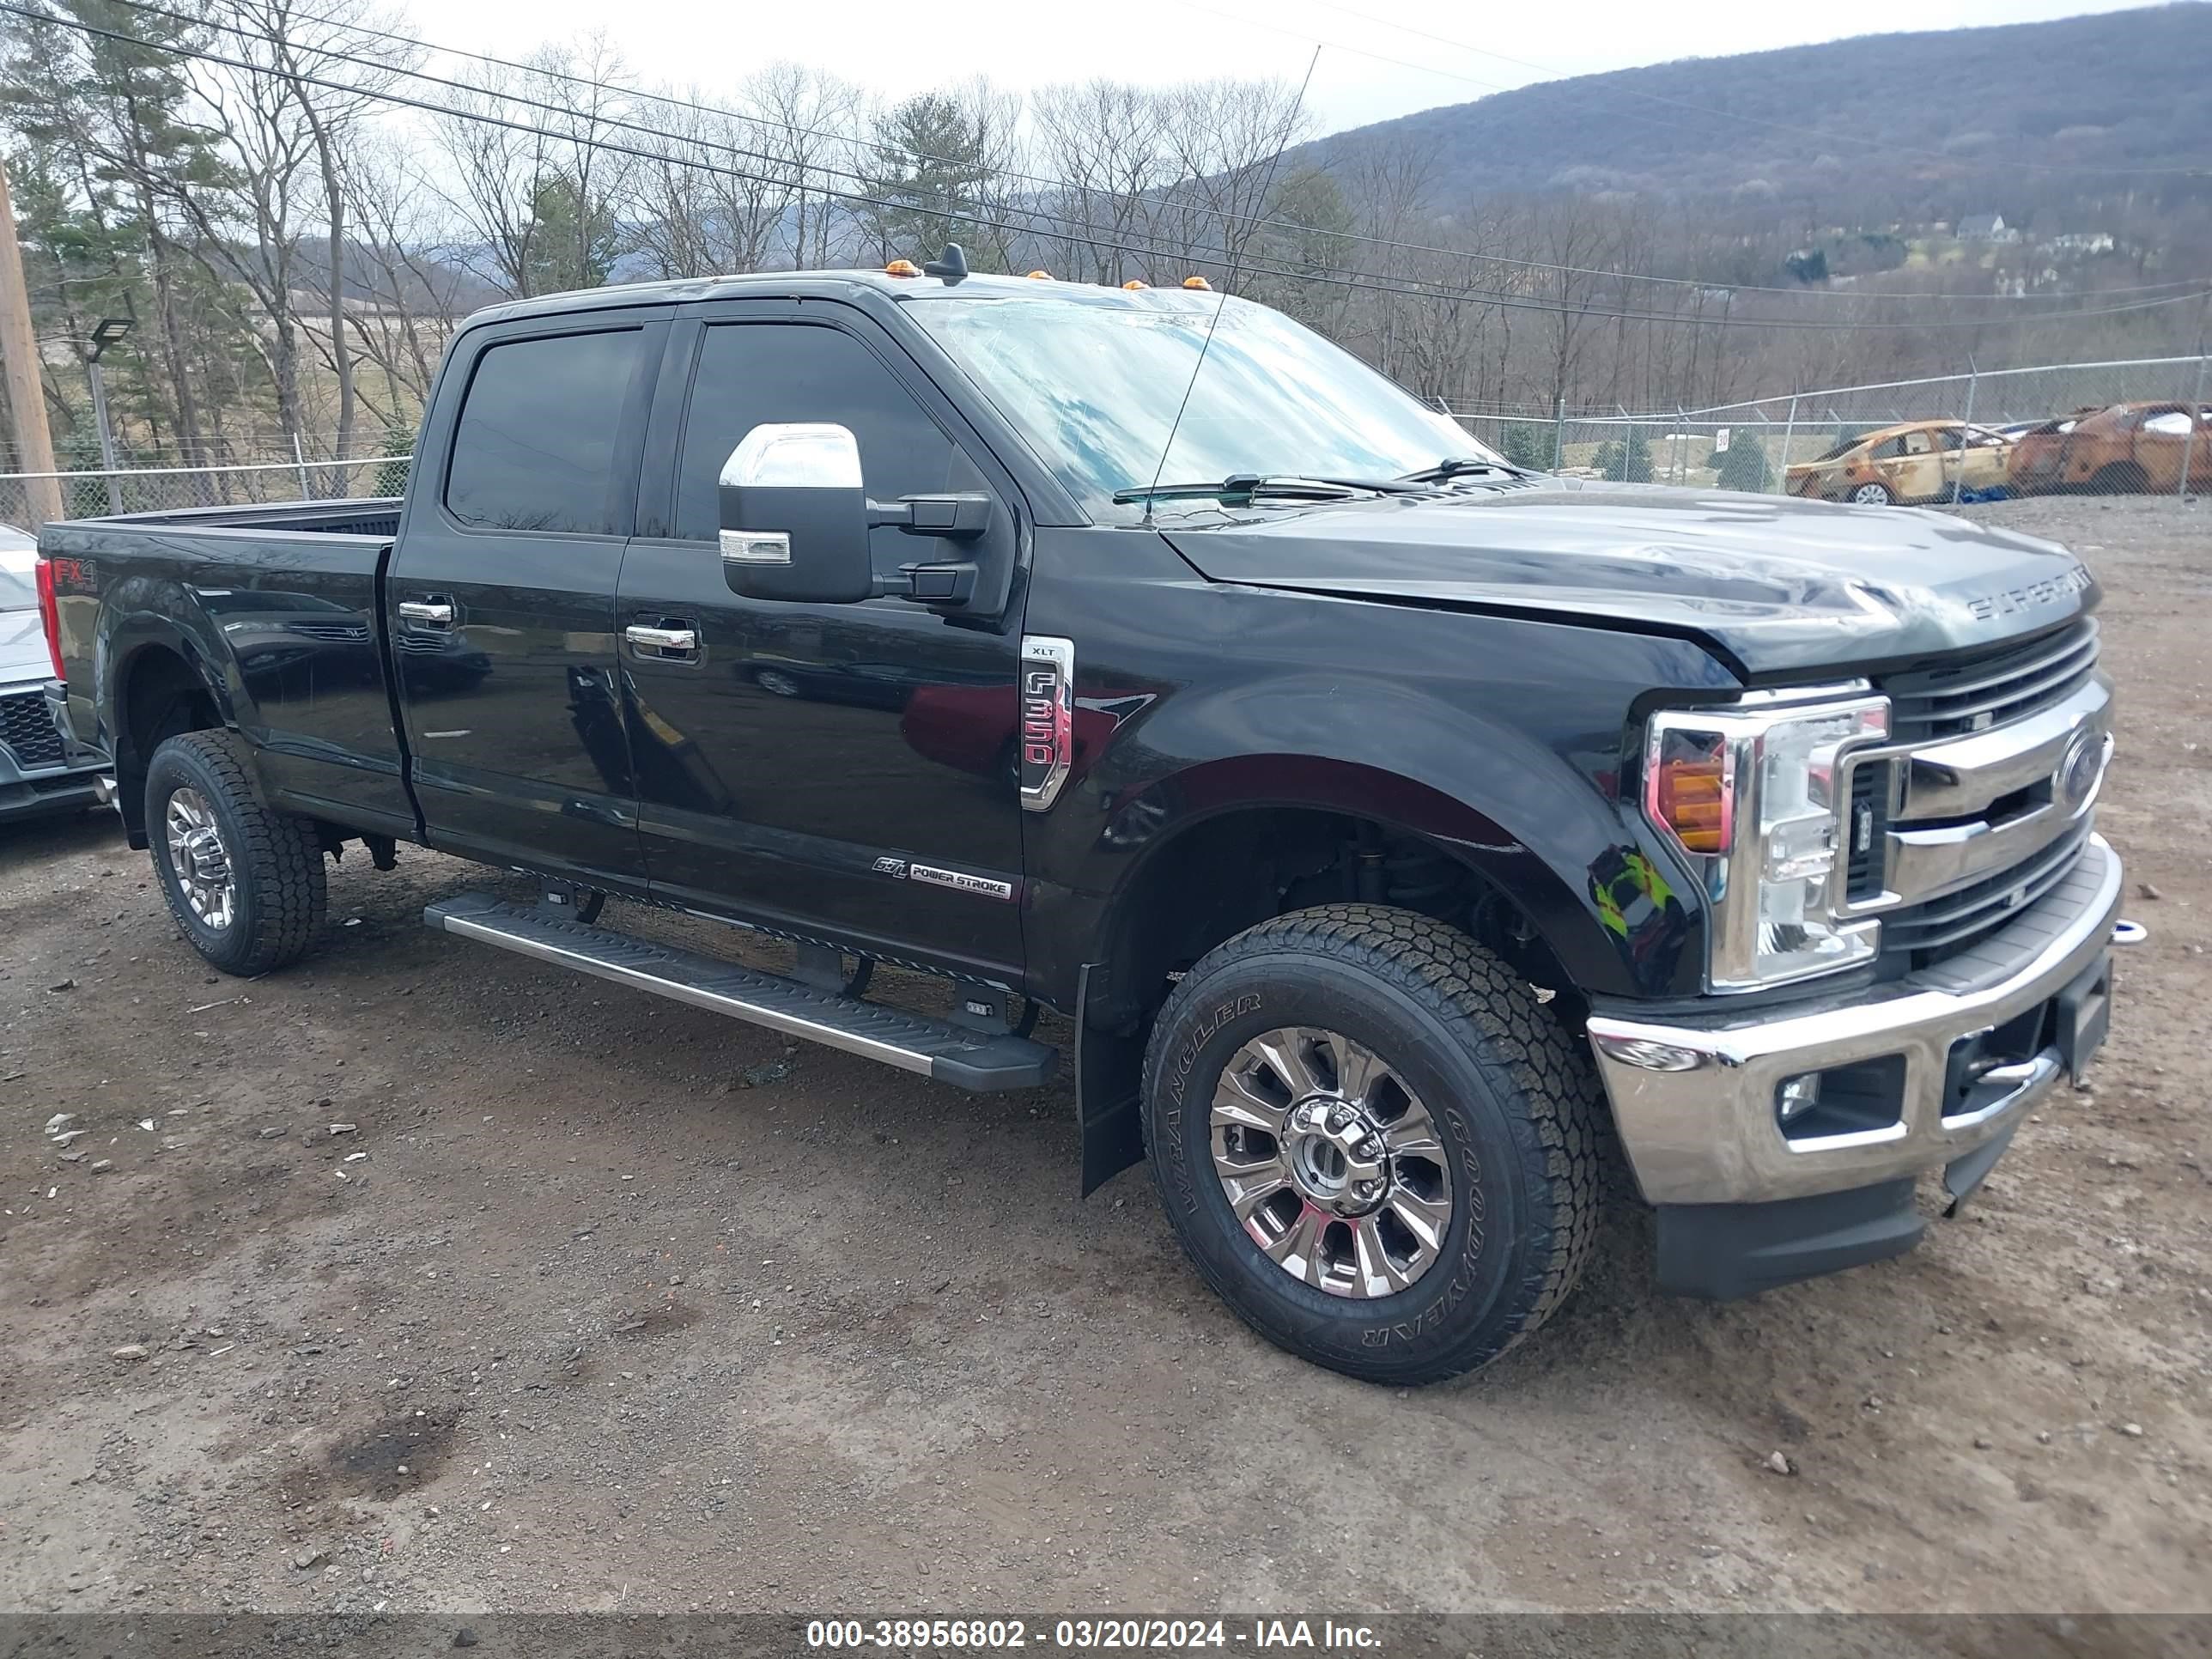 vin: 1FT8W3BT8KEF08331 1FT8W3BT8KEF08331 2019 ford f350 0 for Sale in 07865, 985 State Route 57, Port Murray, New Jersey, USA